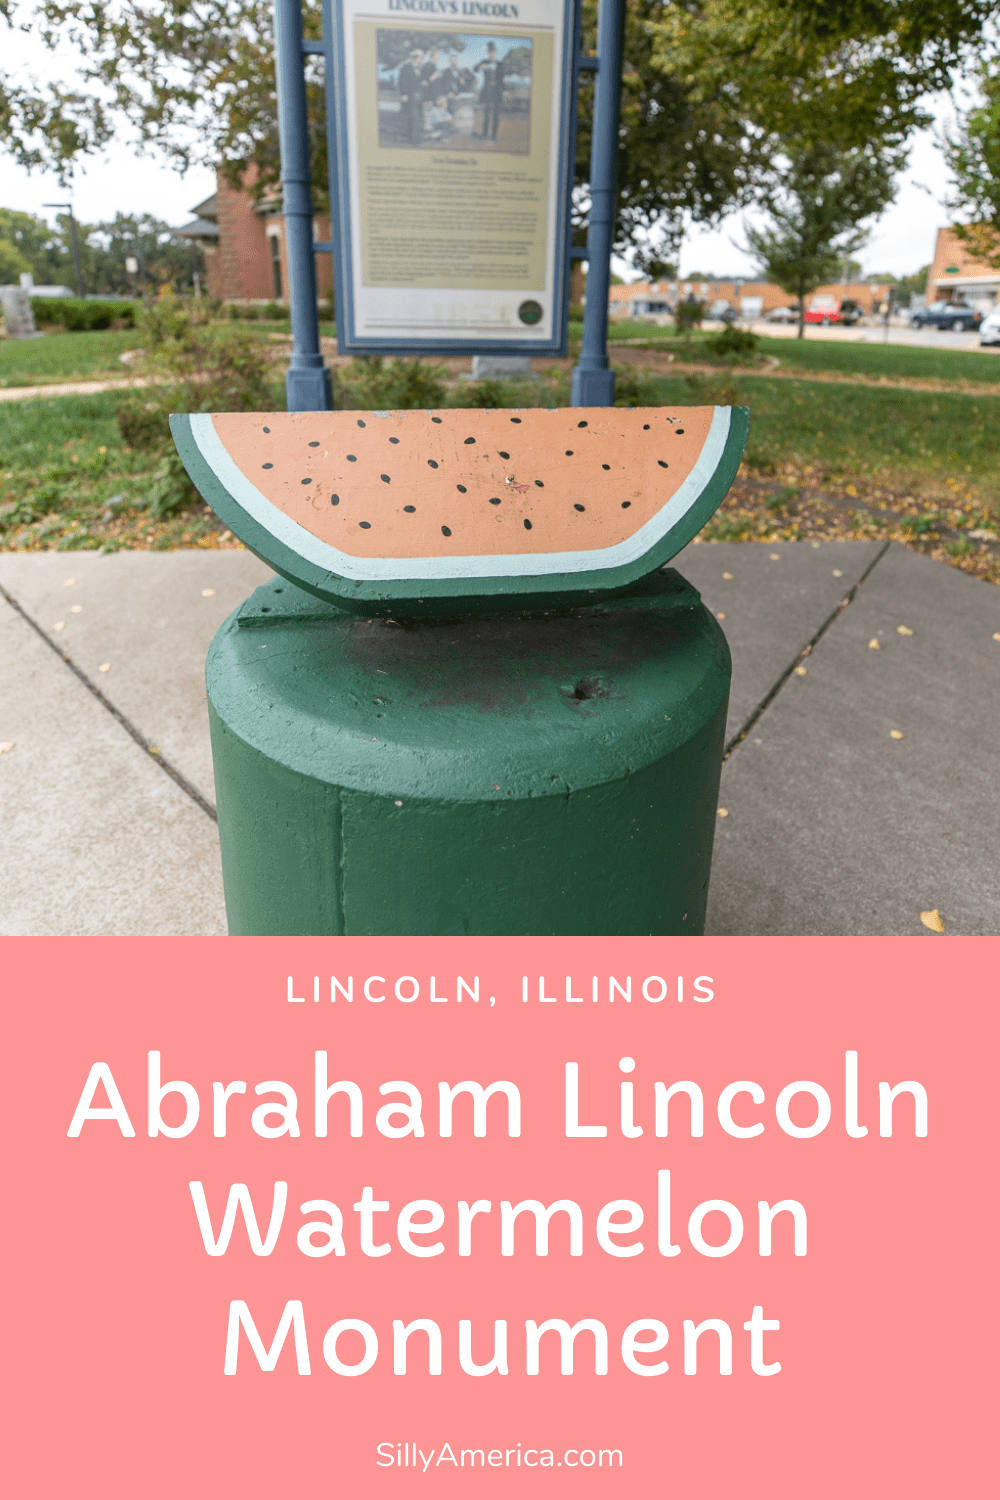 The Abraham Lincoln Watermelon Monument - a metal watermelon roadside attraction displayed in honor of president Abraham Lincoln in Lincoln, Illinois. This weird roadside attraction is a must for your Illinois road trip itinerary or travel bucket list. Add it to the places to visit on your weekend getaway in Illinois.  #RoadTrips #RoadTripStop #Route66 #Route66RoadTrip #IllinoisRoute66 #Illinois #IllinoisRoadTrip #RoadsideAttractions #RoadsideAttraction #RoadsideAmerica #RoadTrip